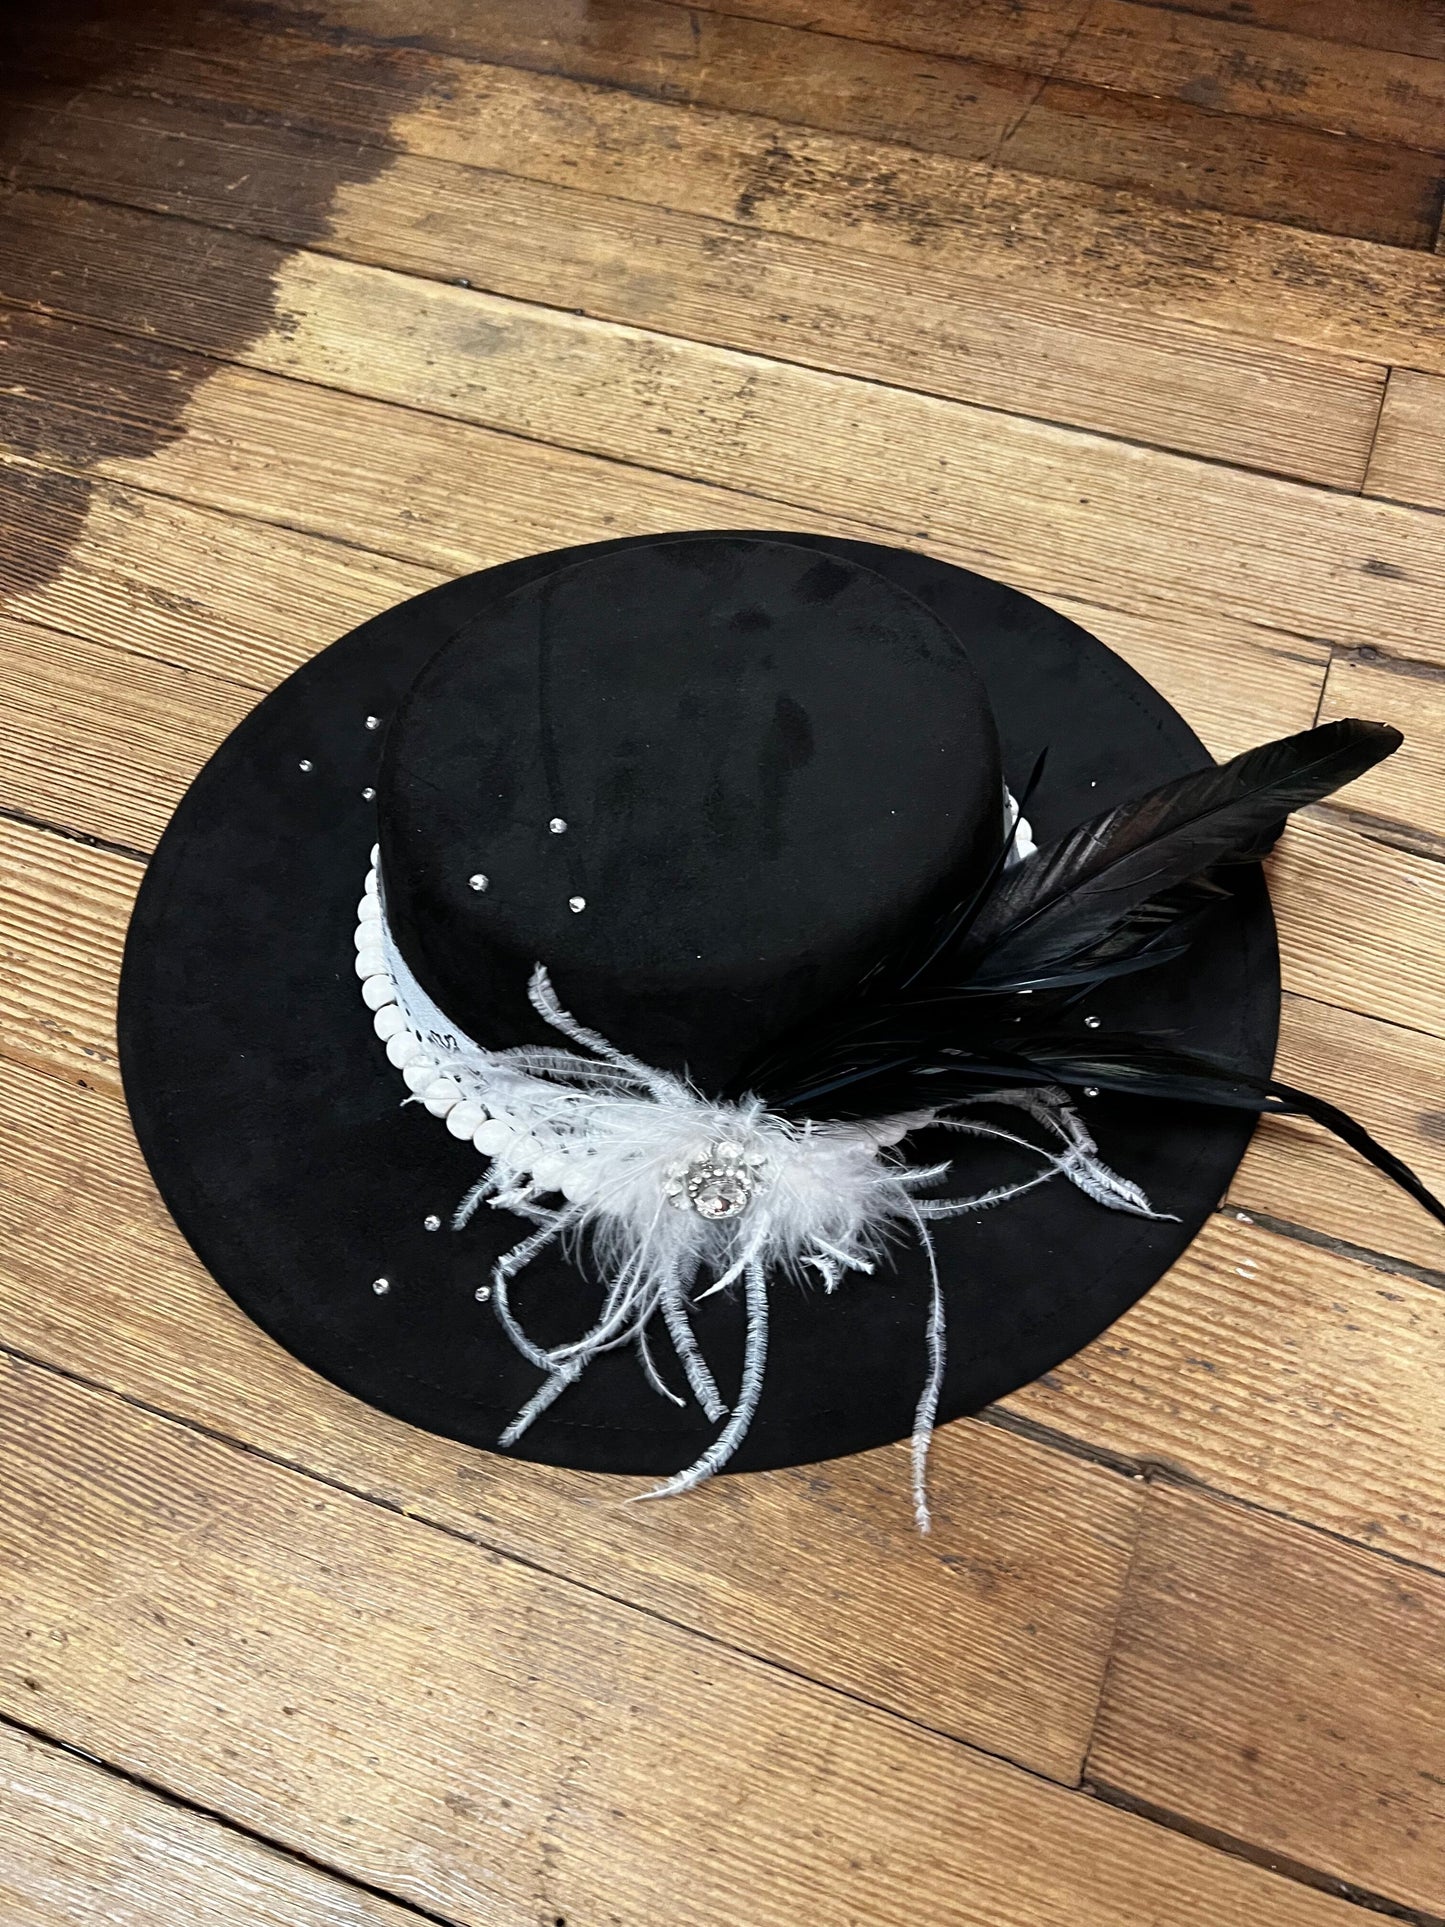 Western hat, with cross and feathers